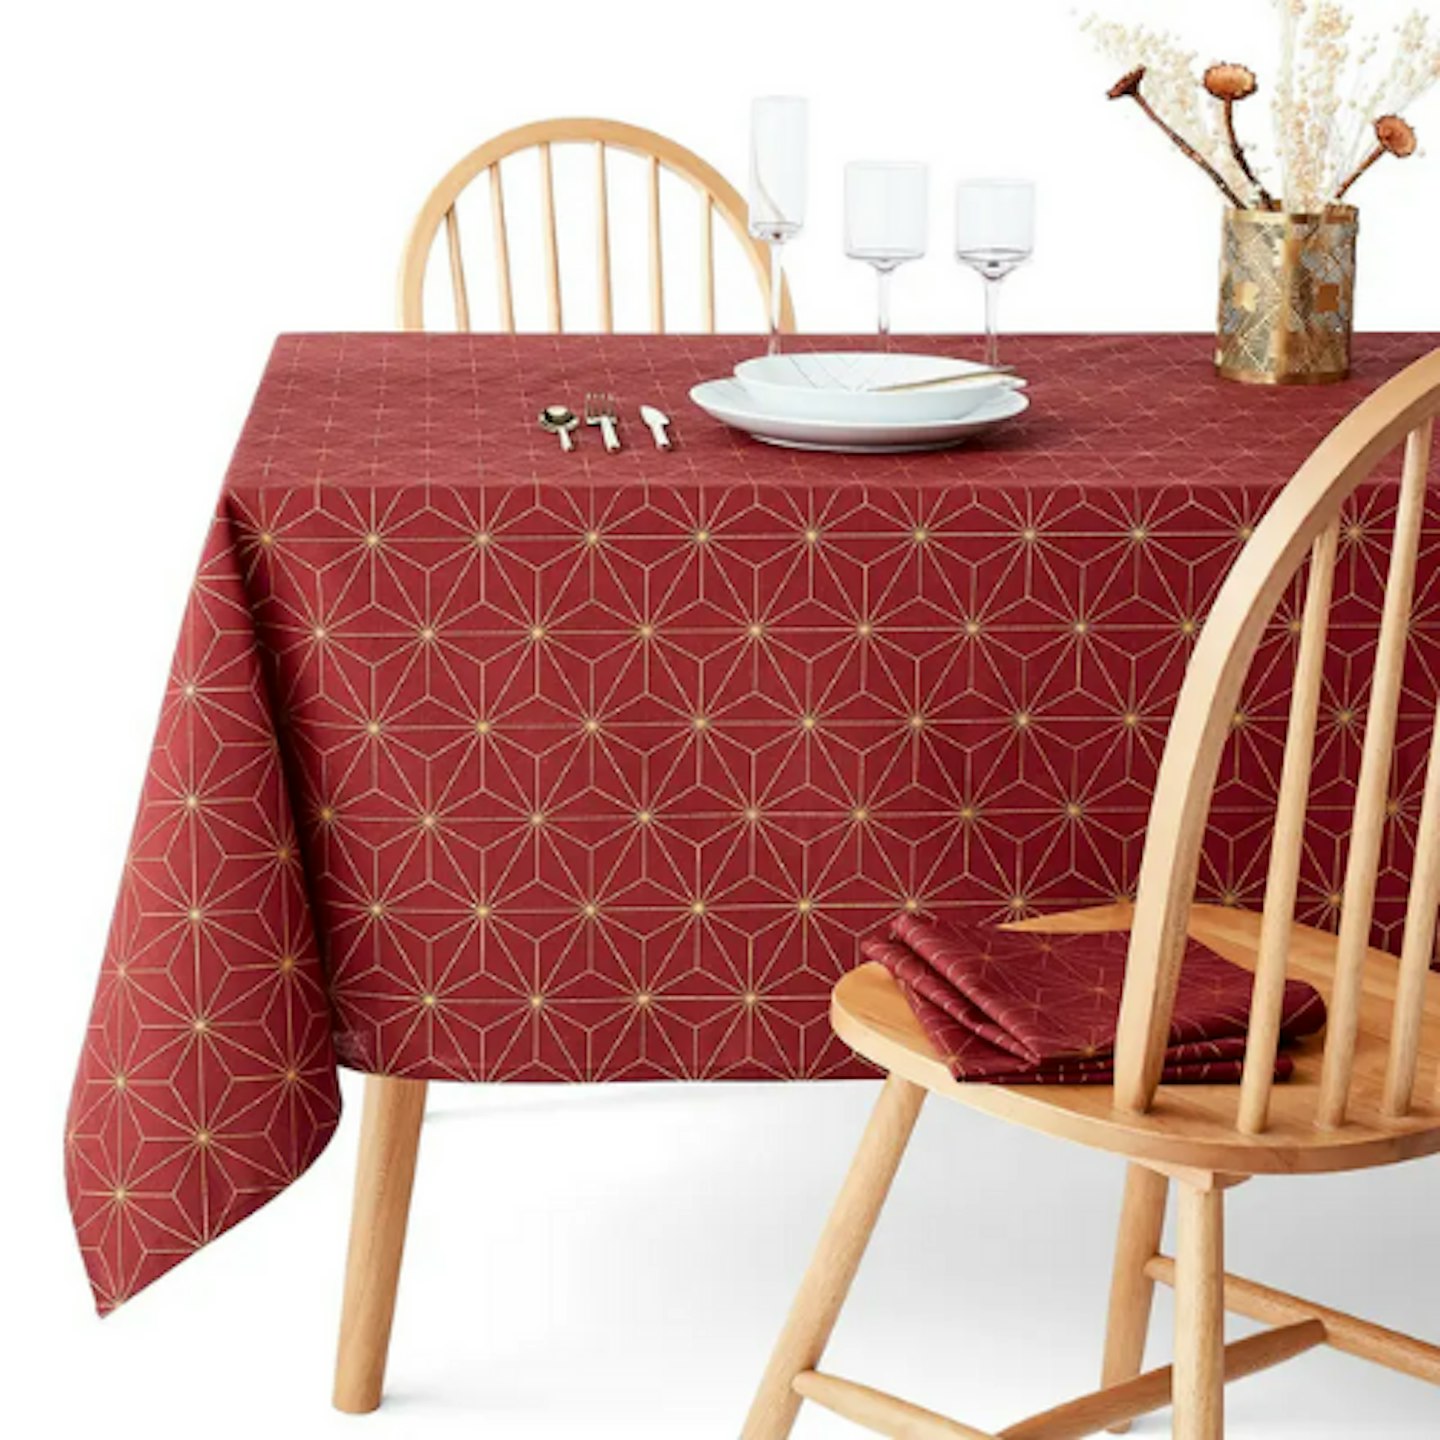 La Redoute Interieurs Nordic Star Patterned Tablecloth